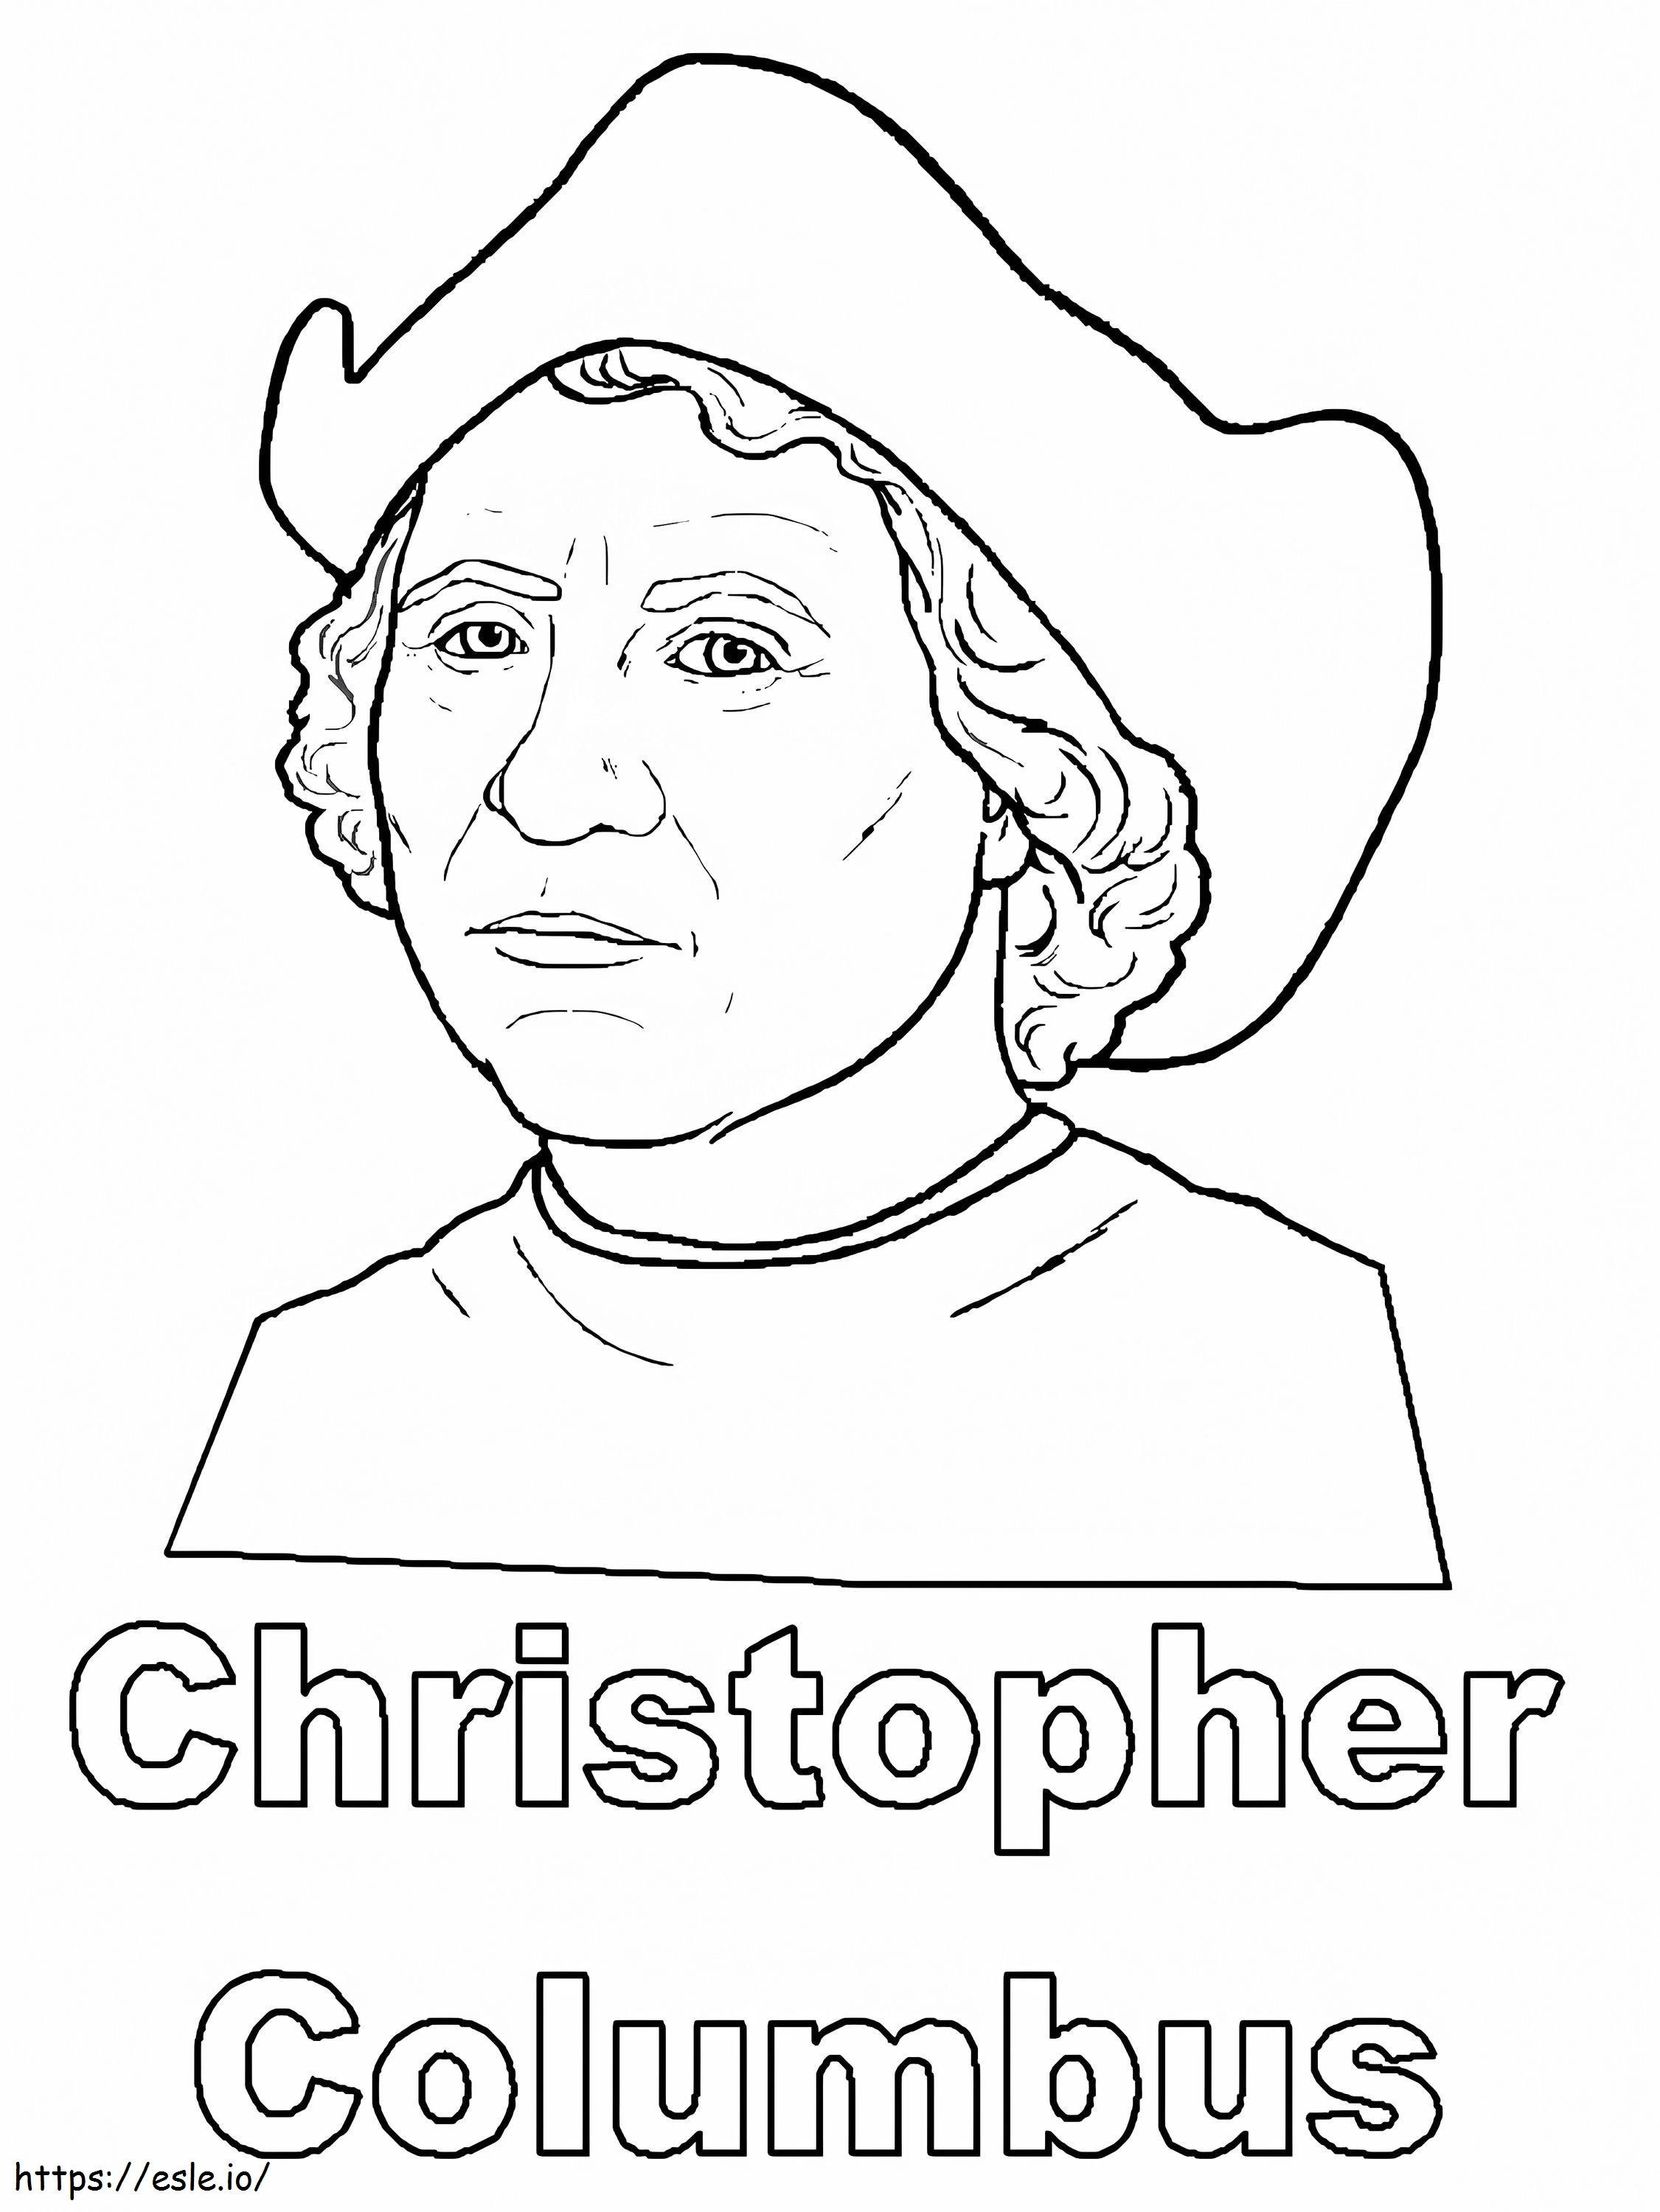 1555719867 Columbus 3 coloring page